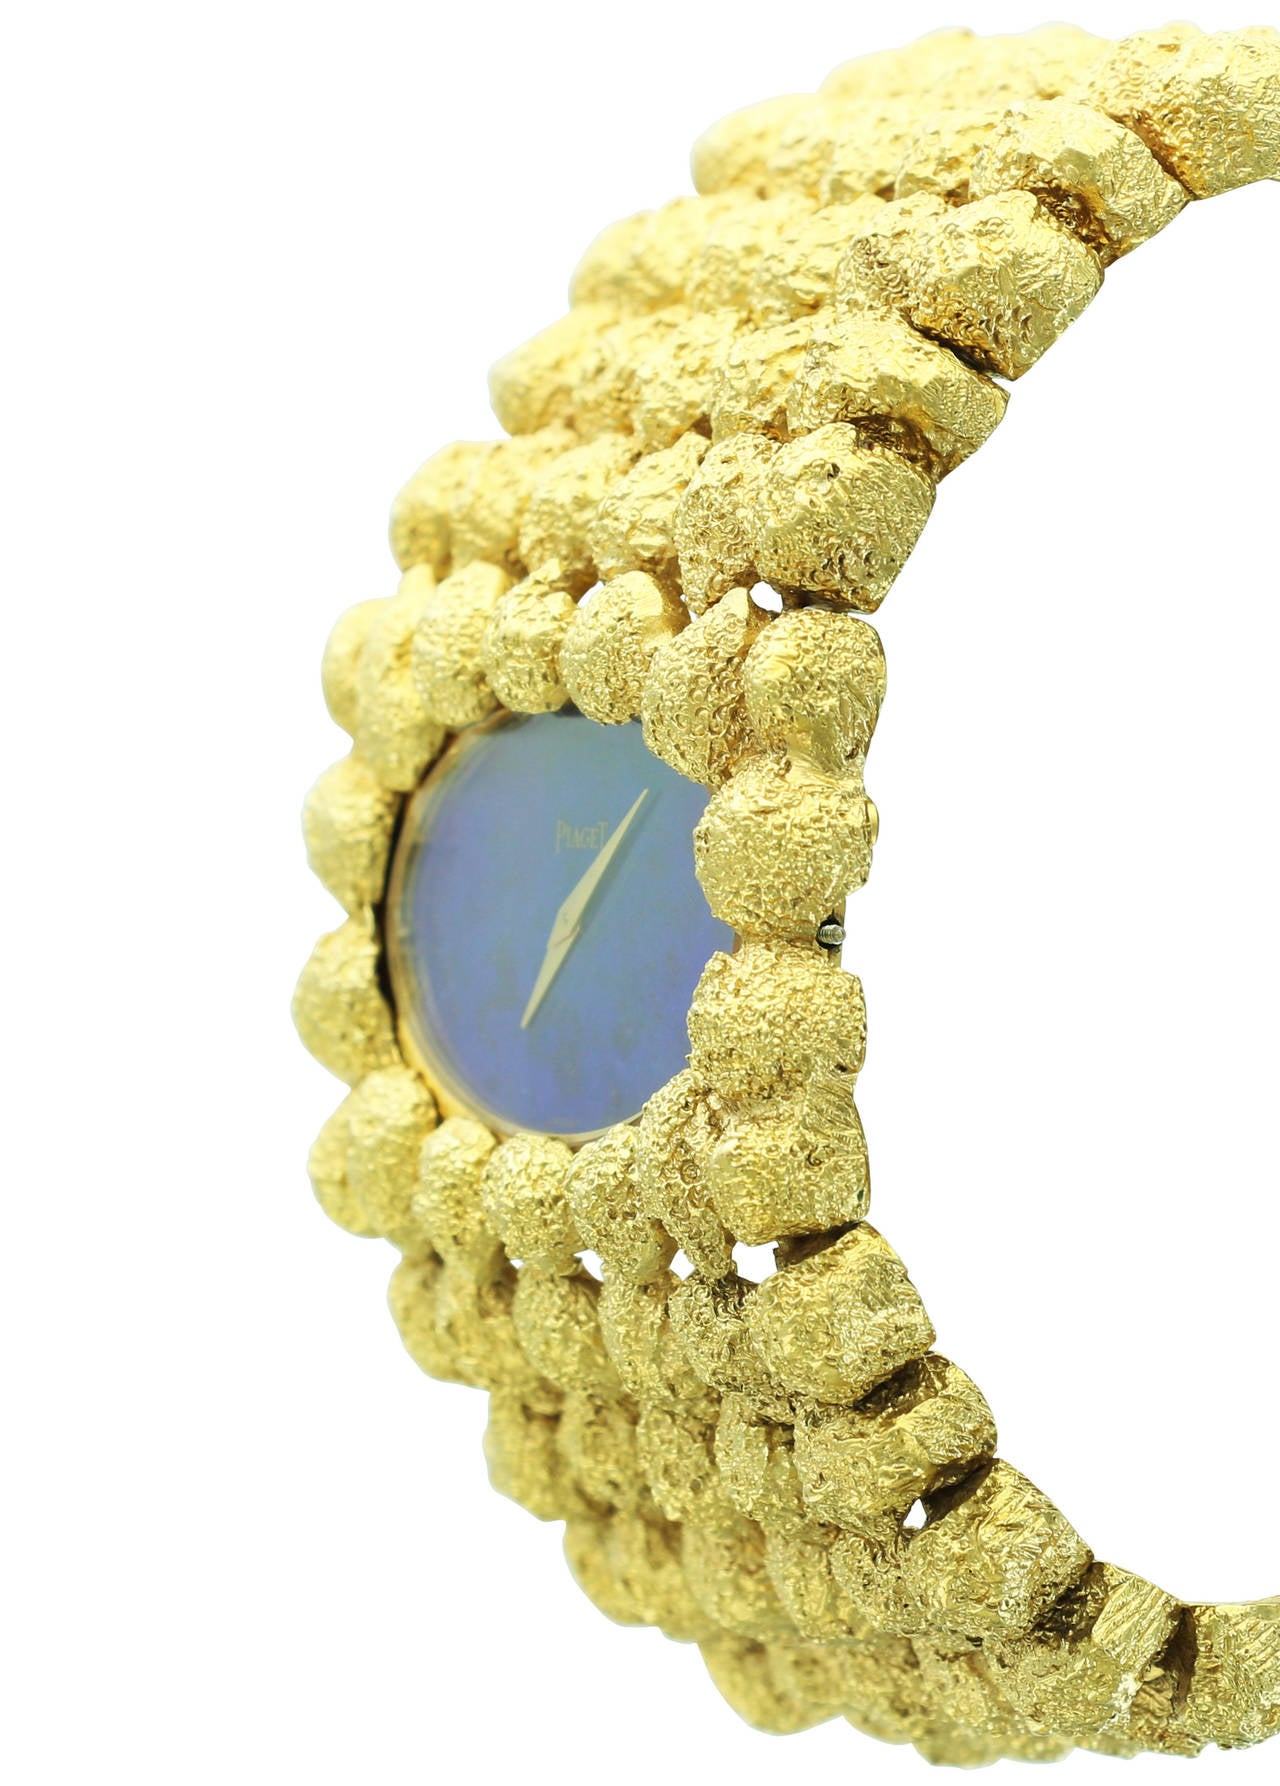 This beautiful Piaget ladies wristwatch features a heavy, solid yellow gold bracelet and vibrant lapis dial.